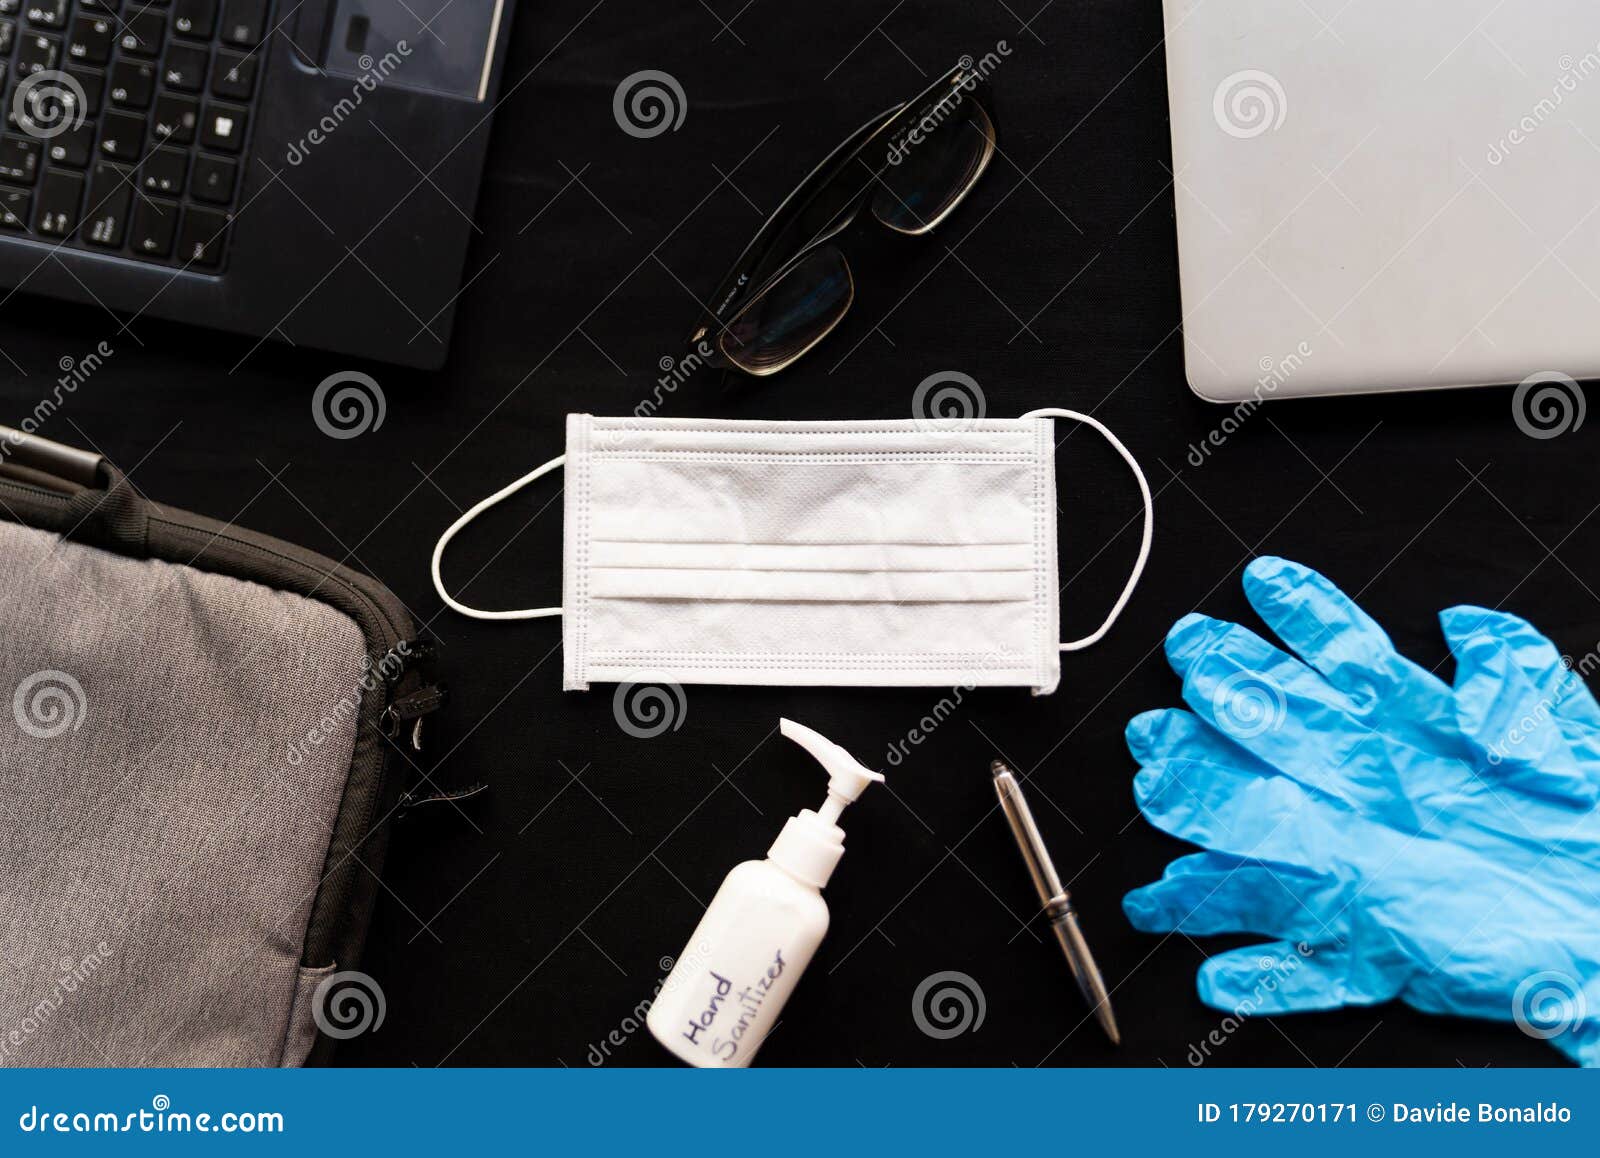 work from home cleaning kit on black background office desk with hand sanitizer and face mask and gloves, against coronavirus